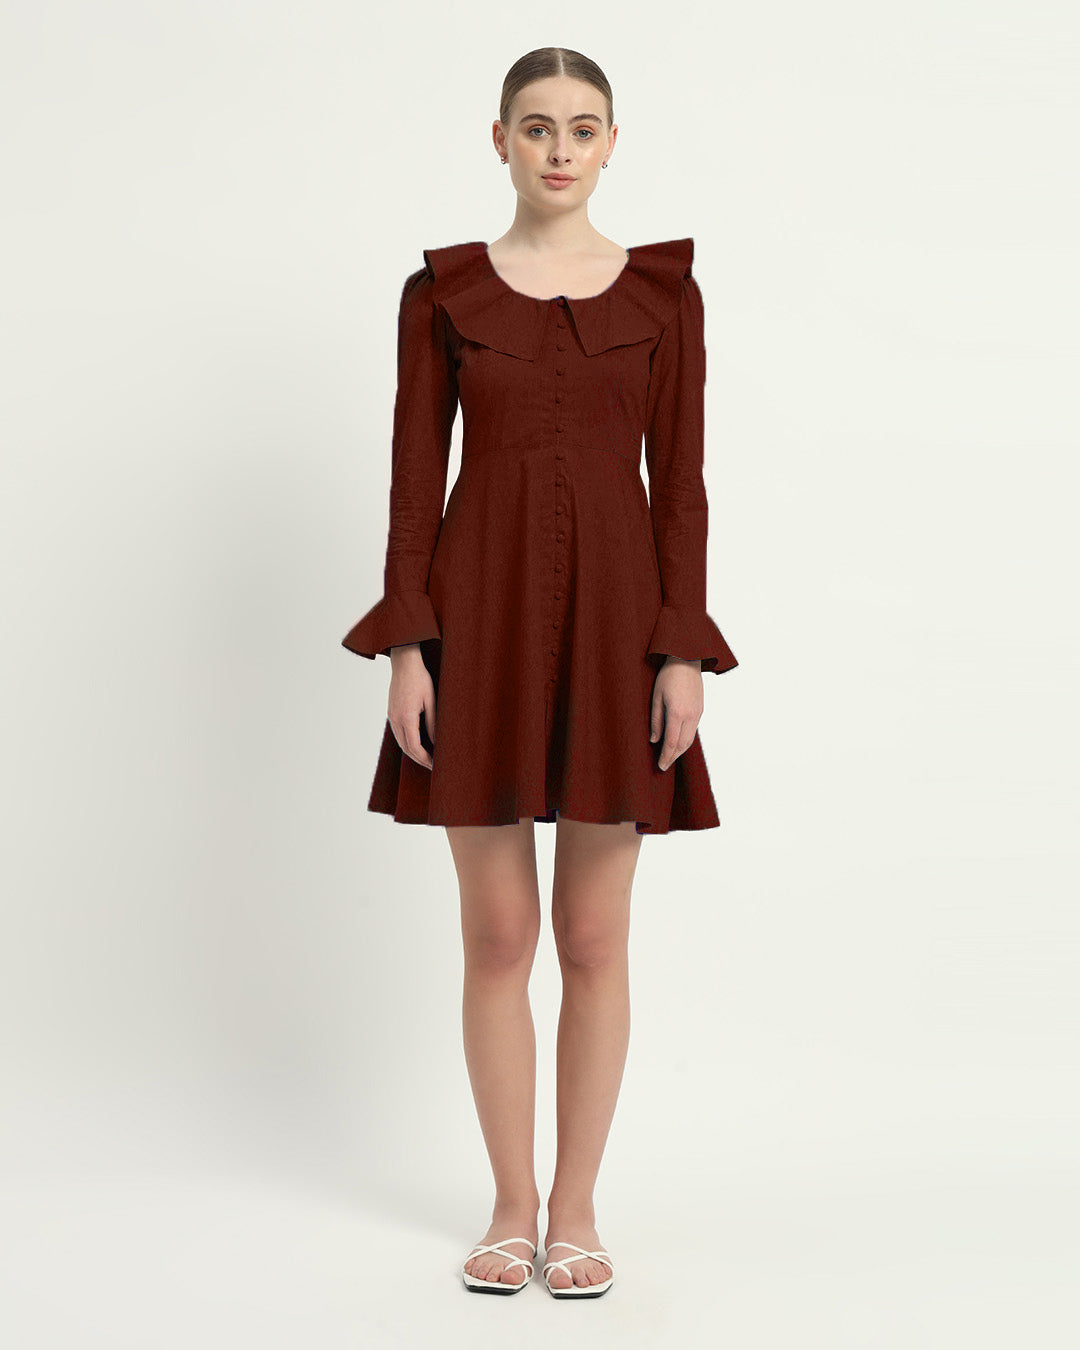 The Rouge Fredonia Cotton Dress